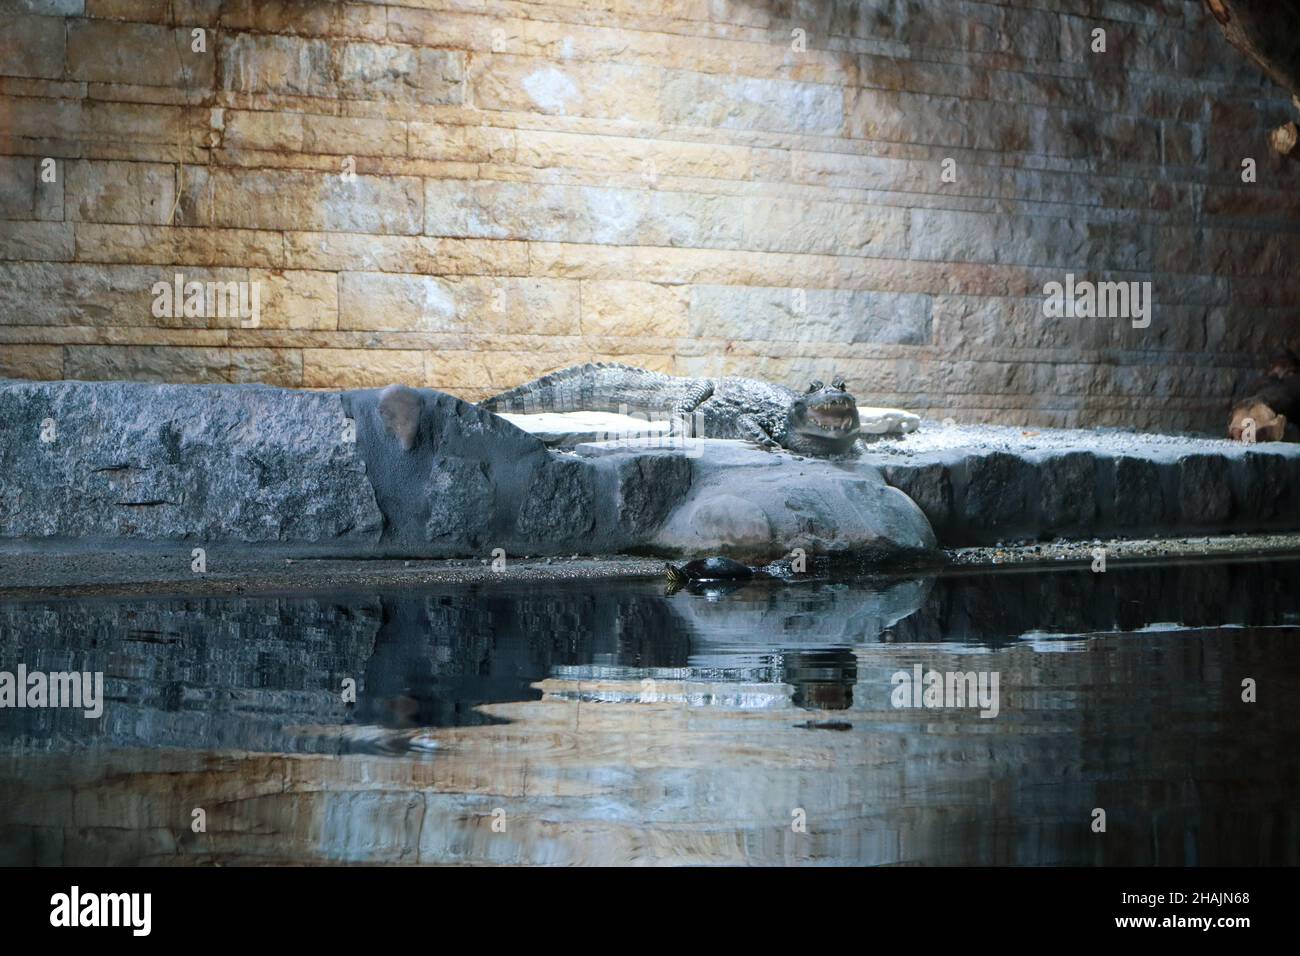 Crocodile sitting in front of a wall and a few turtles in the water Stock Photo